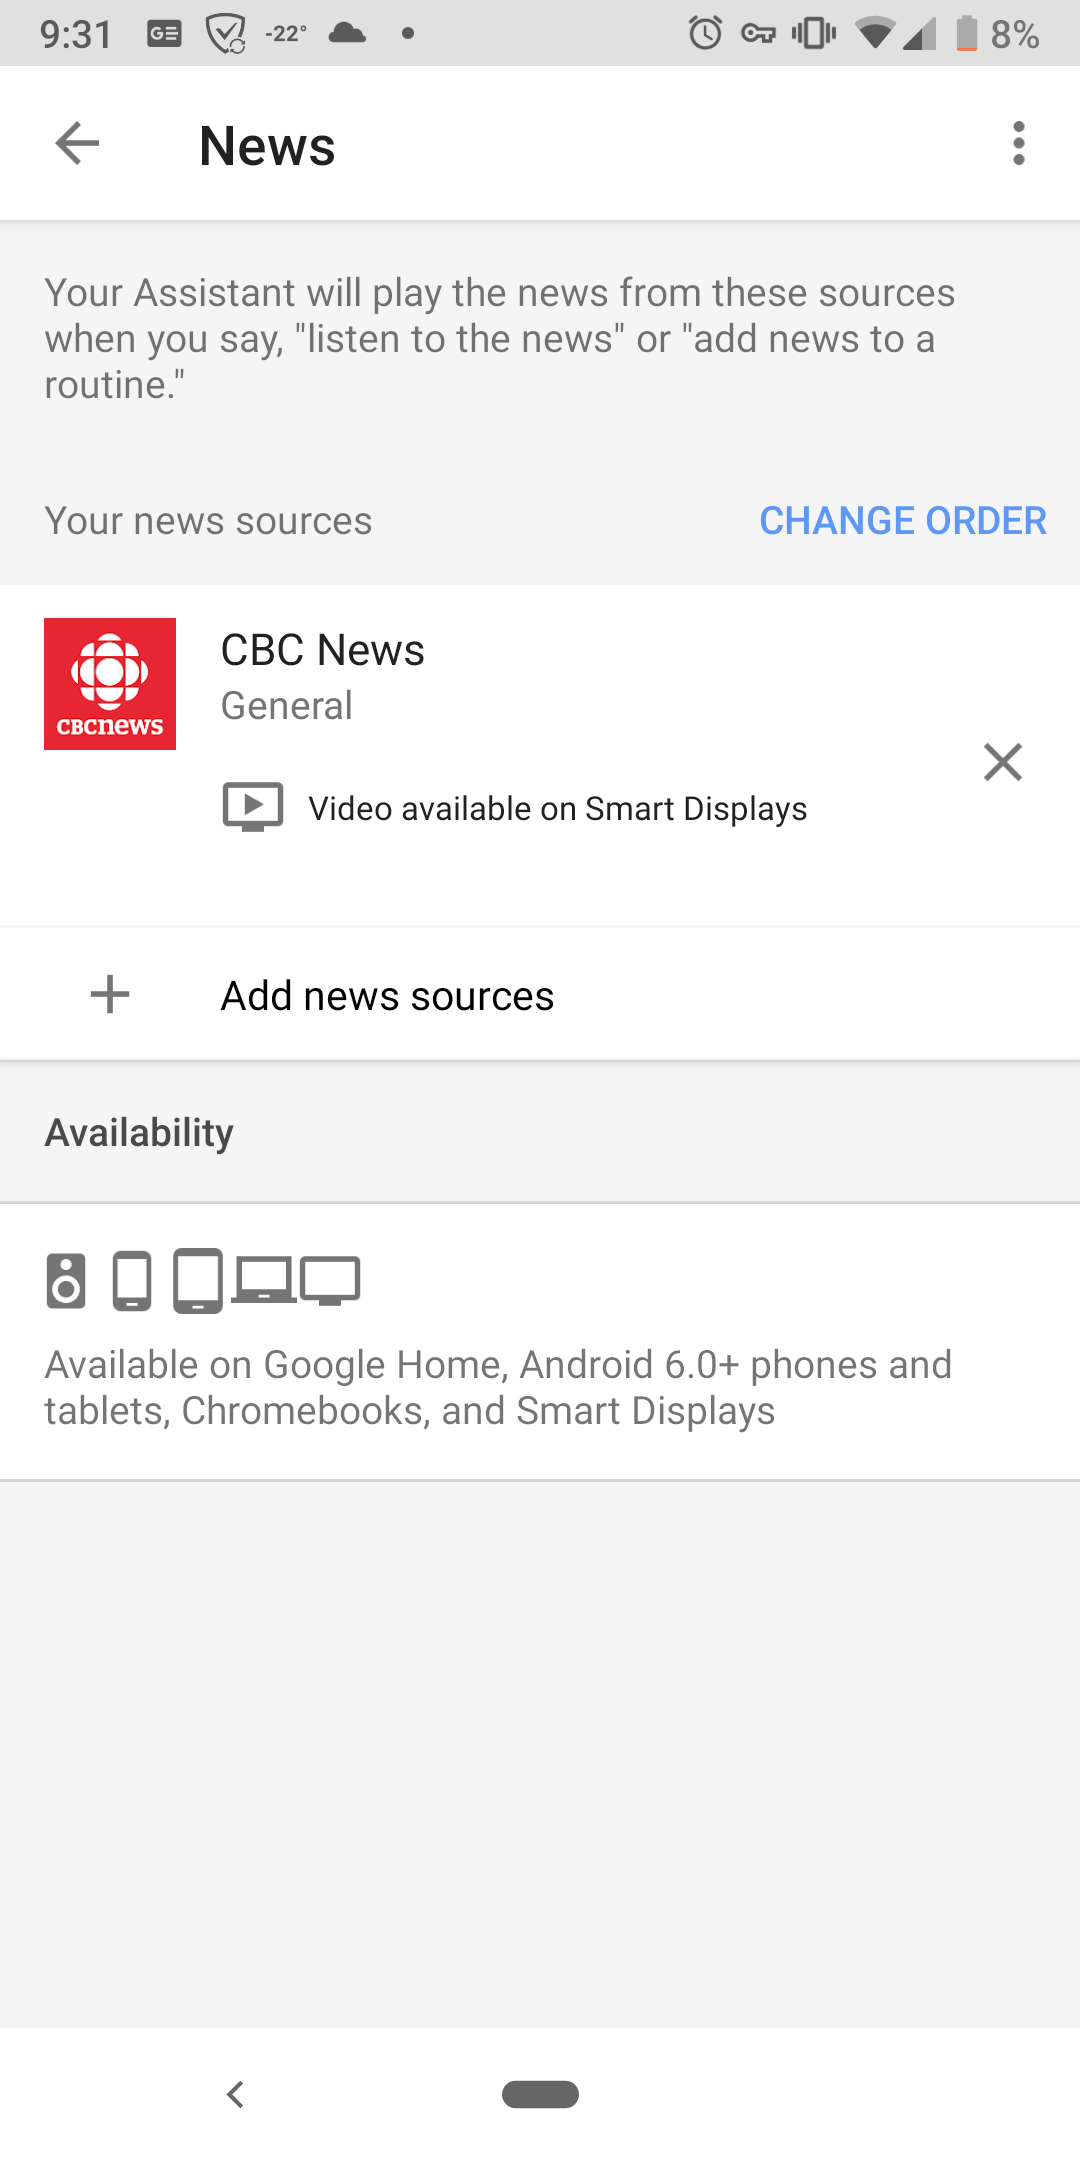 Google Home Hub In Canada News Results Are Not Yet